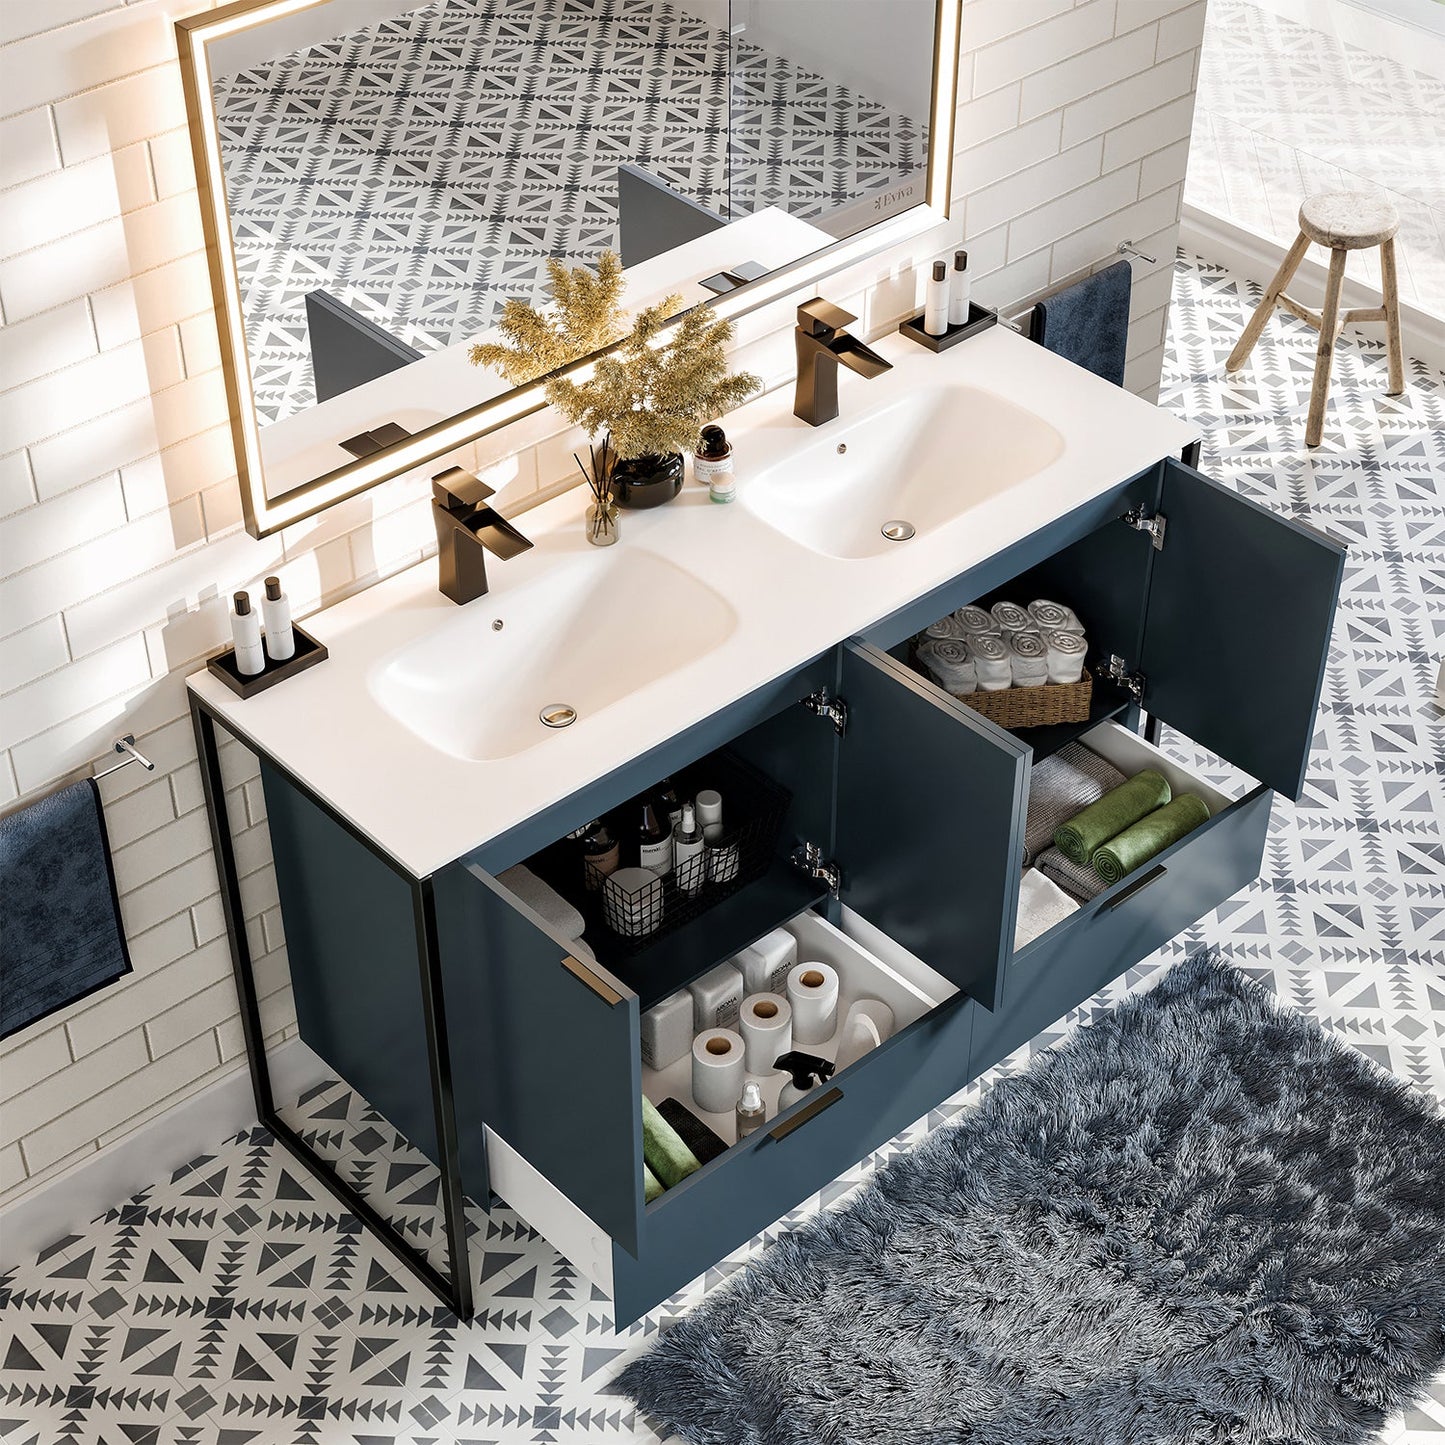 Moma 48"W x 18"D Blue Bathroom Vanity with Solid Surface Countertop and Integrated Sink